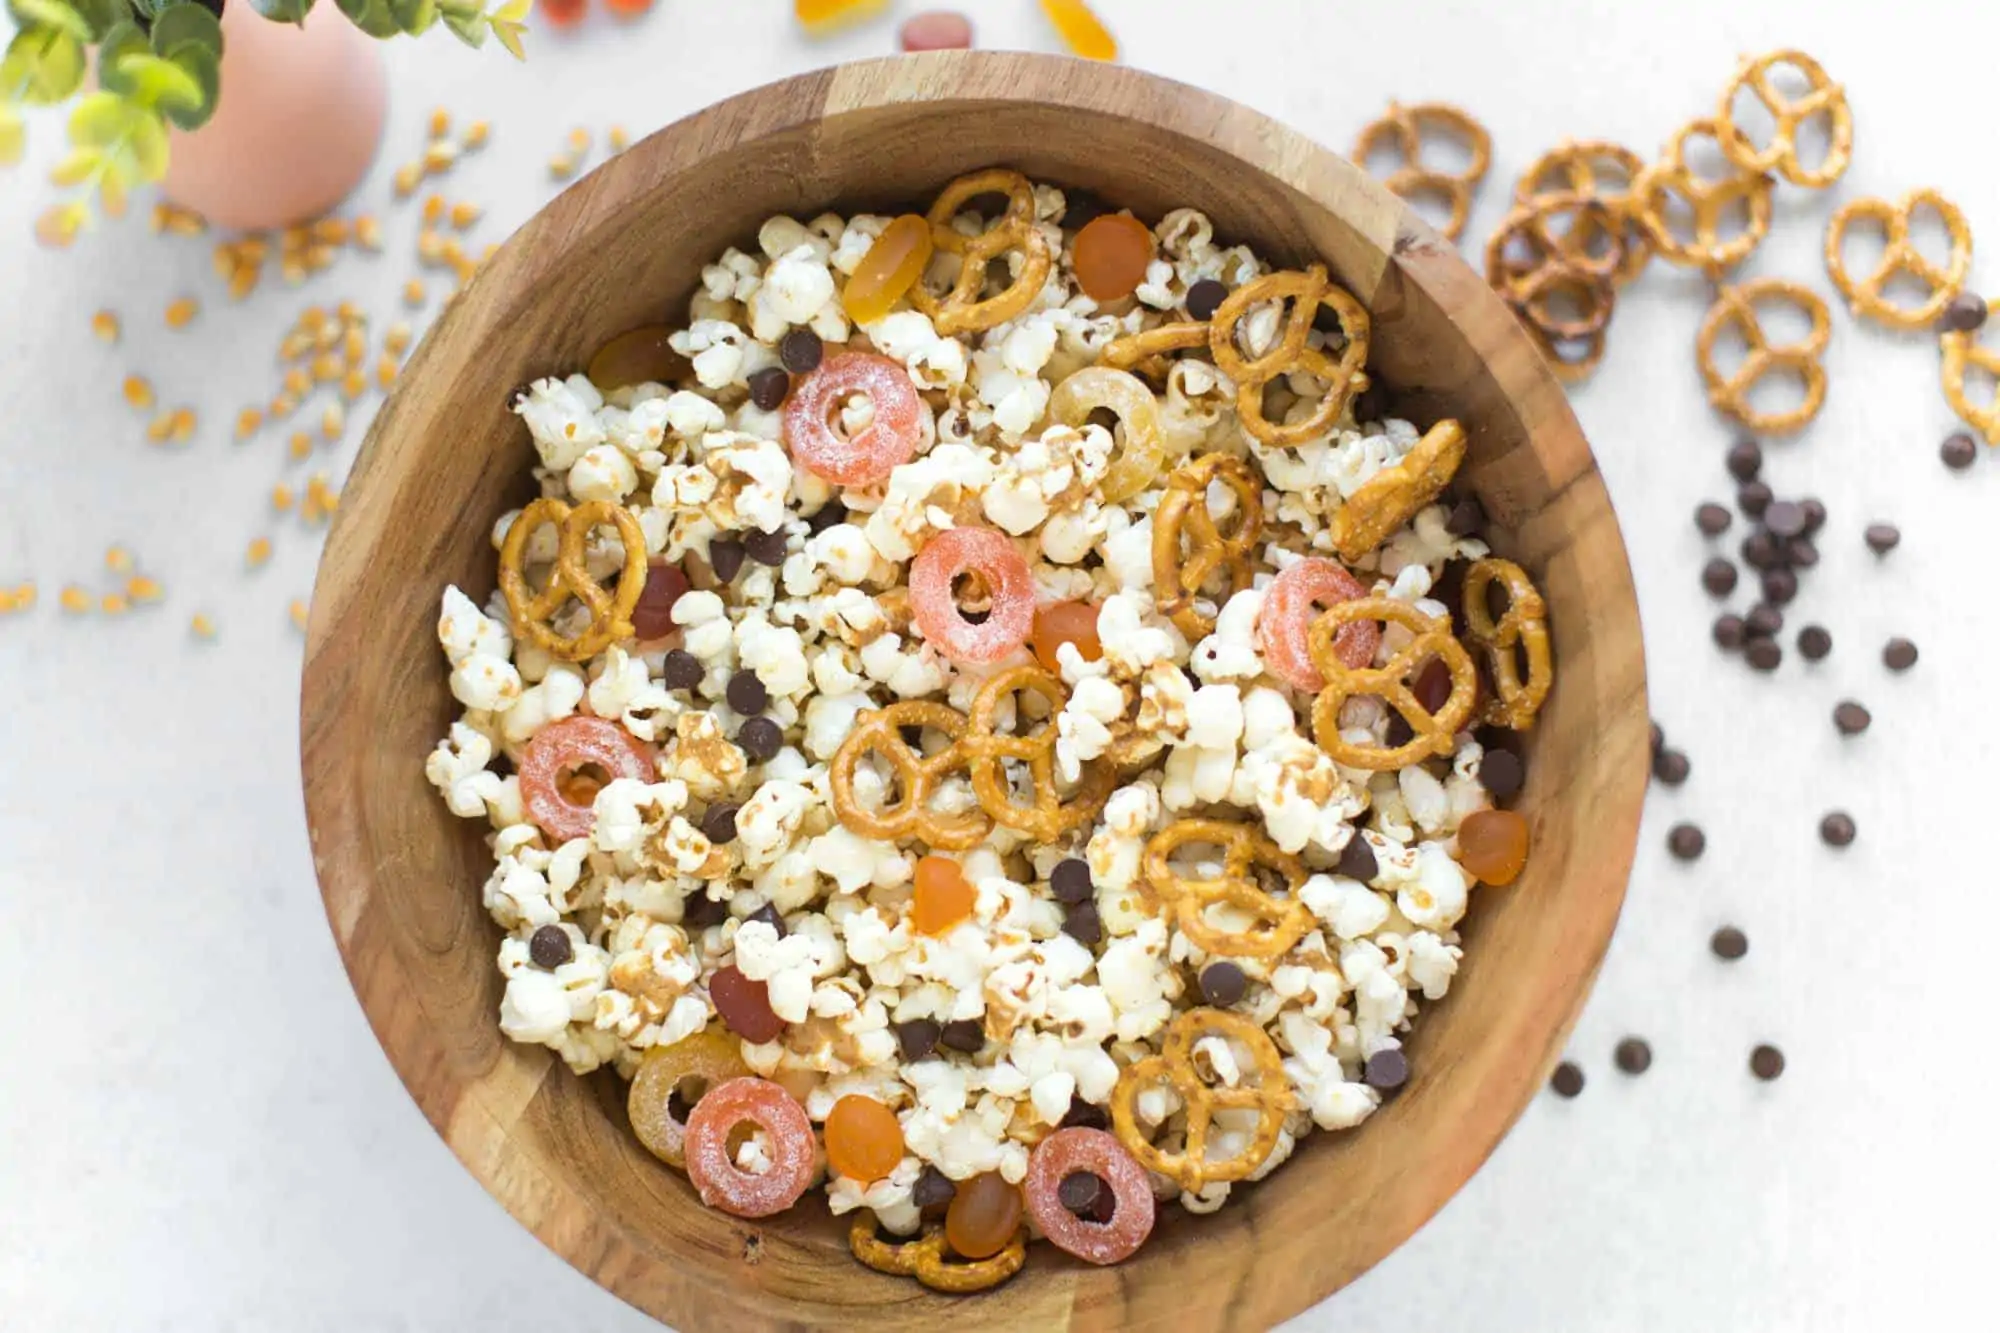 bowl of popcorn with candy, pretzels, and chocolate chips